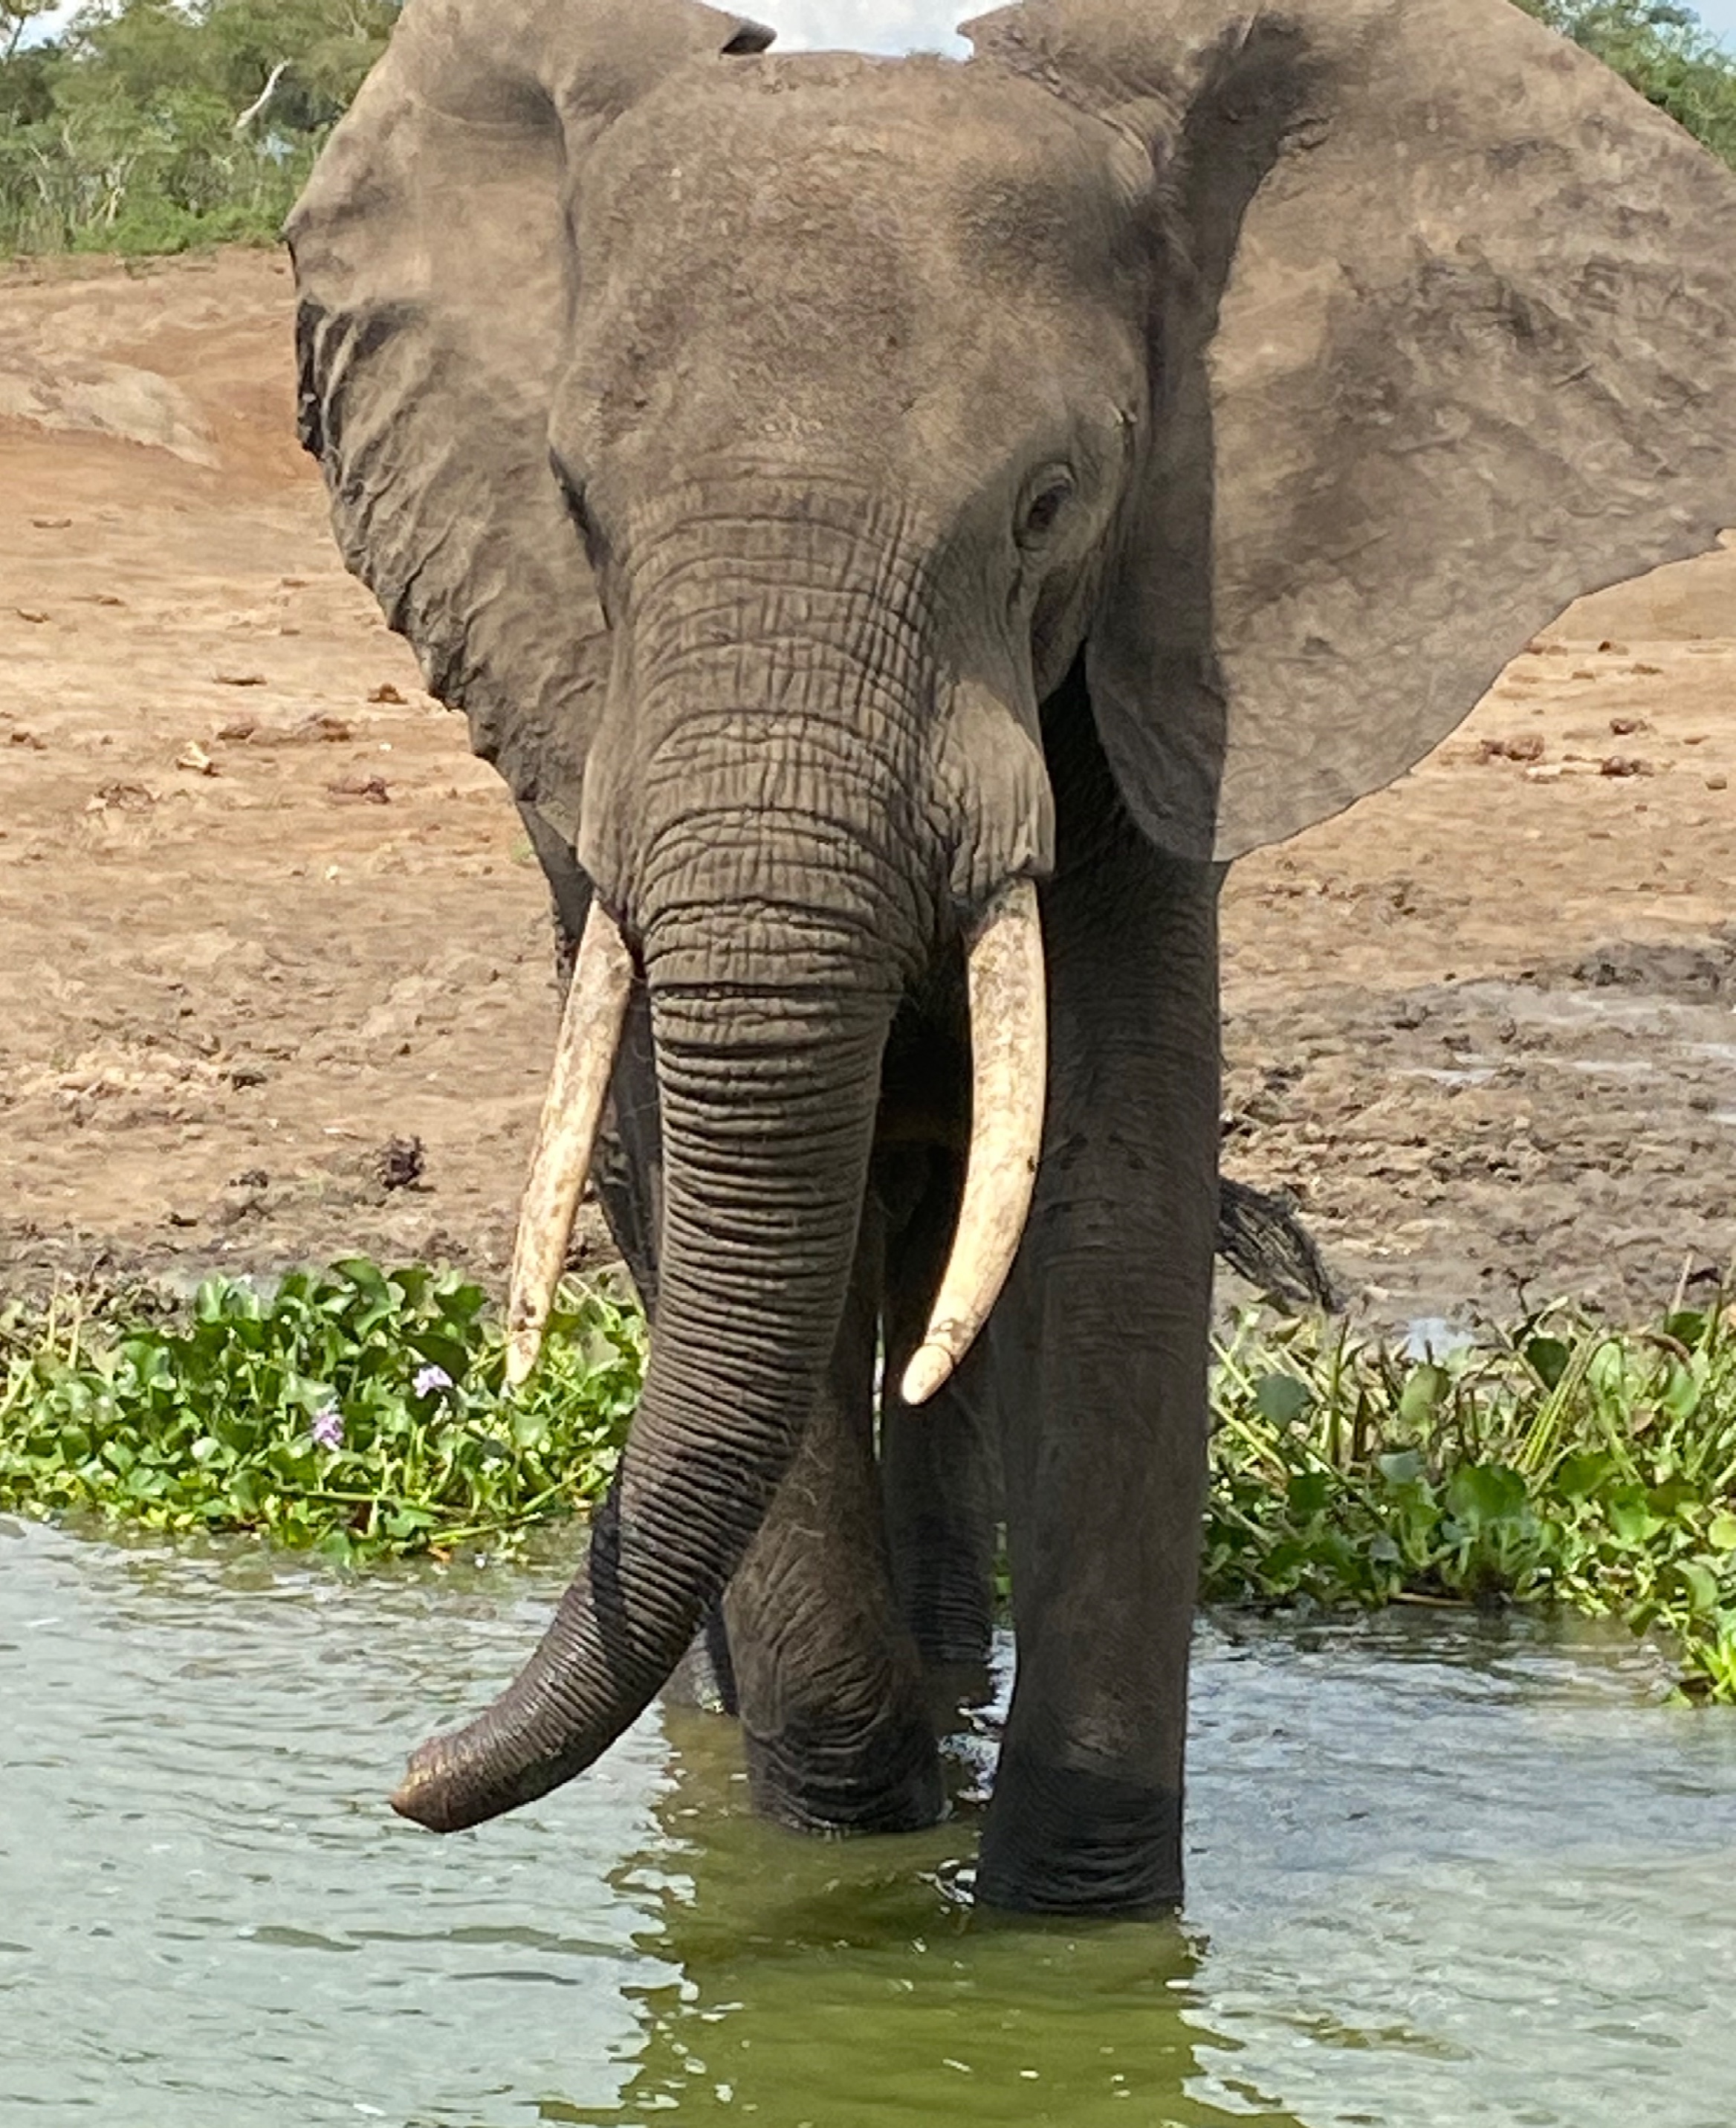 Close-up photo of a huge elephant in the water.